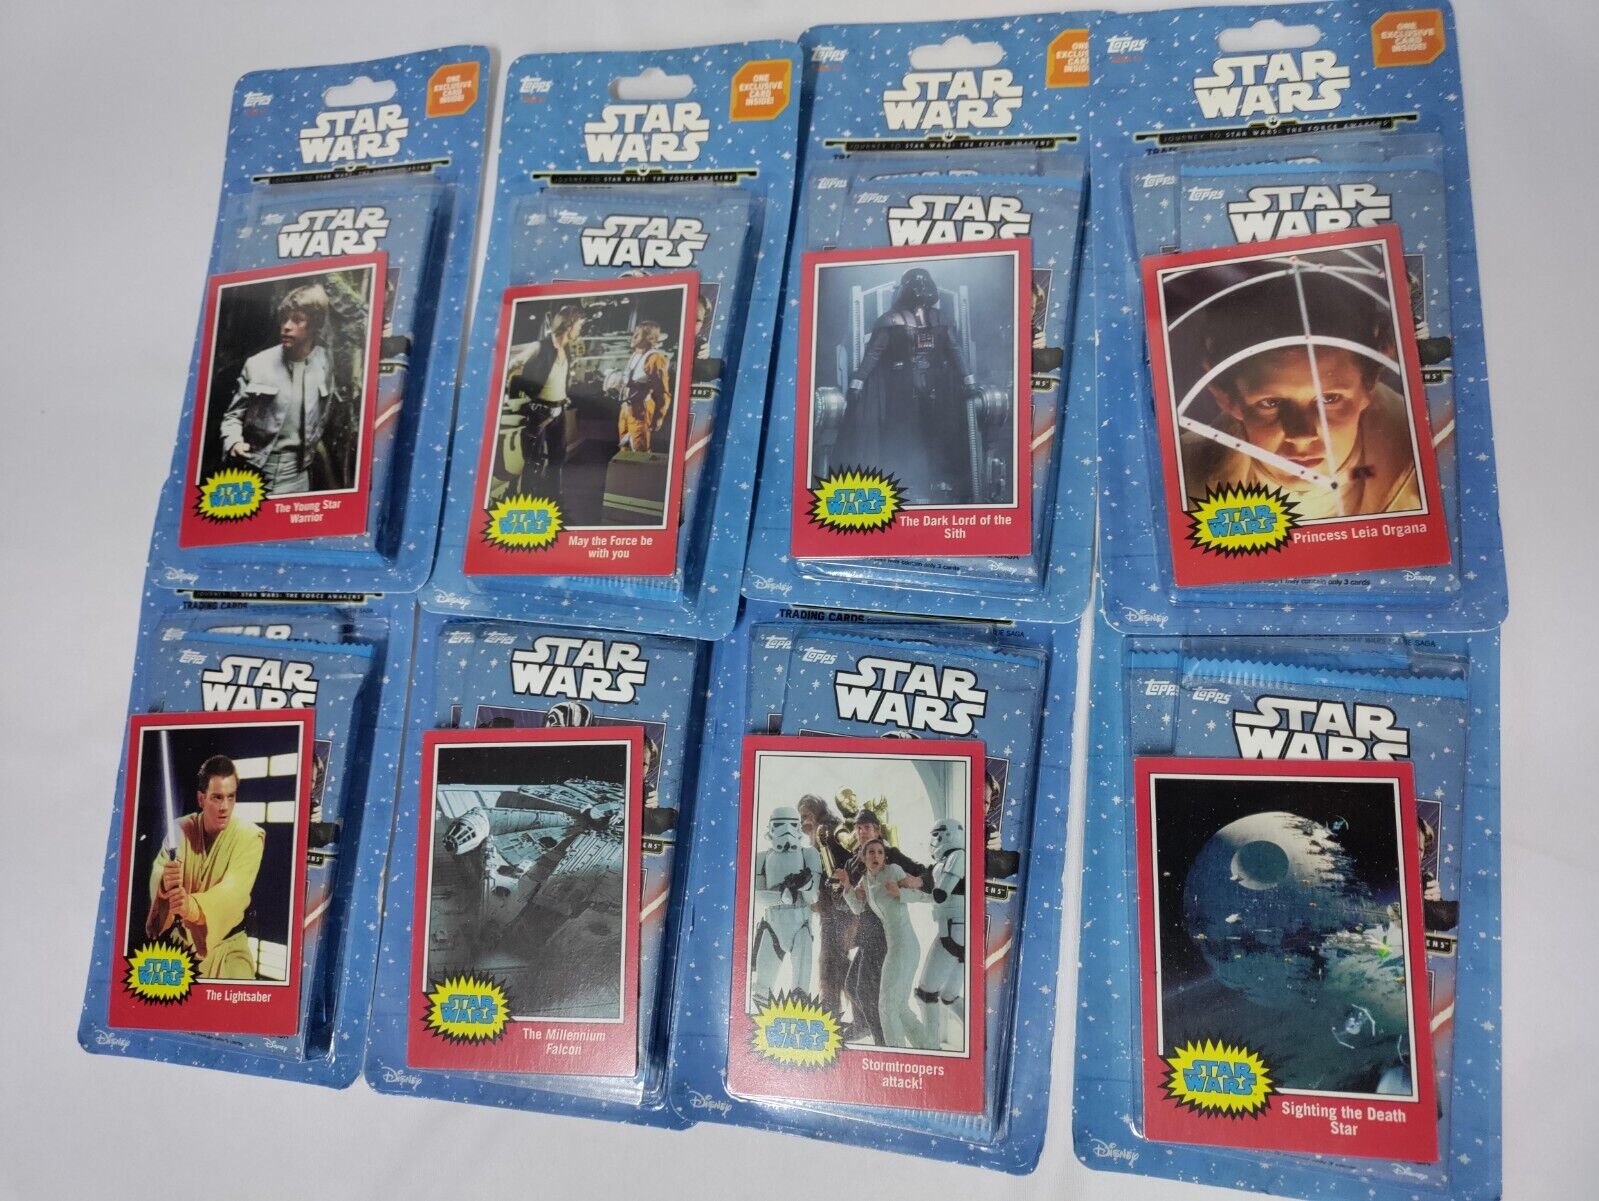 STAR WARS Journey To The Force Awakens Topps 2015 Packs All 8 Exclusive Cards